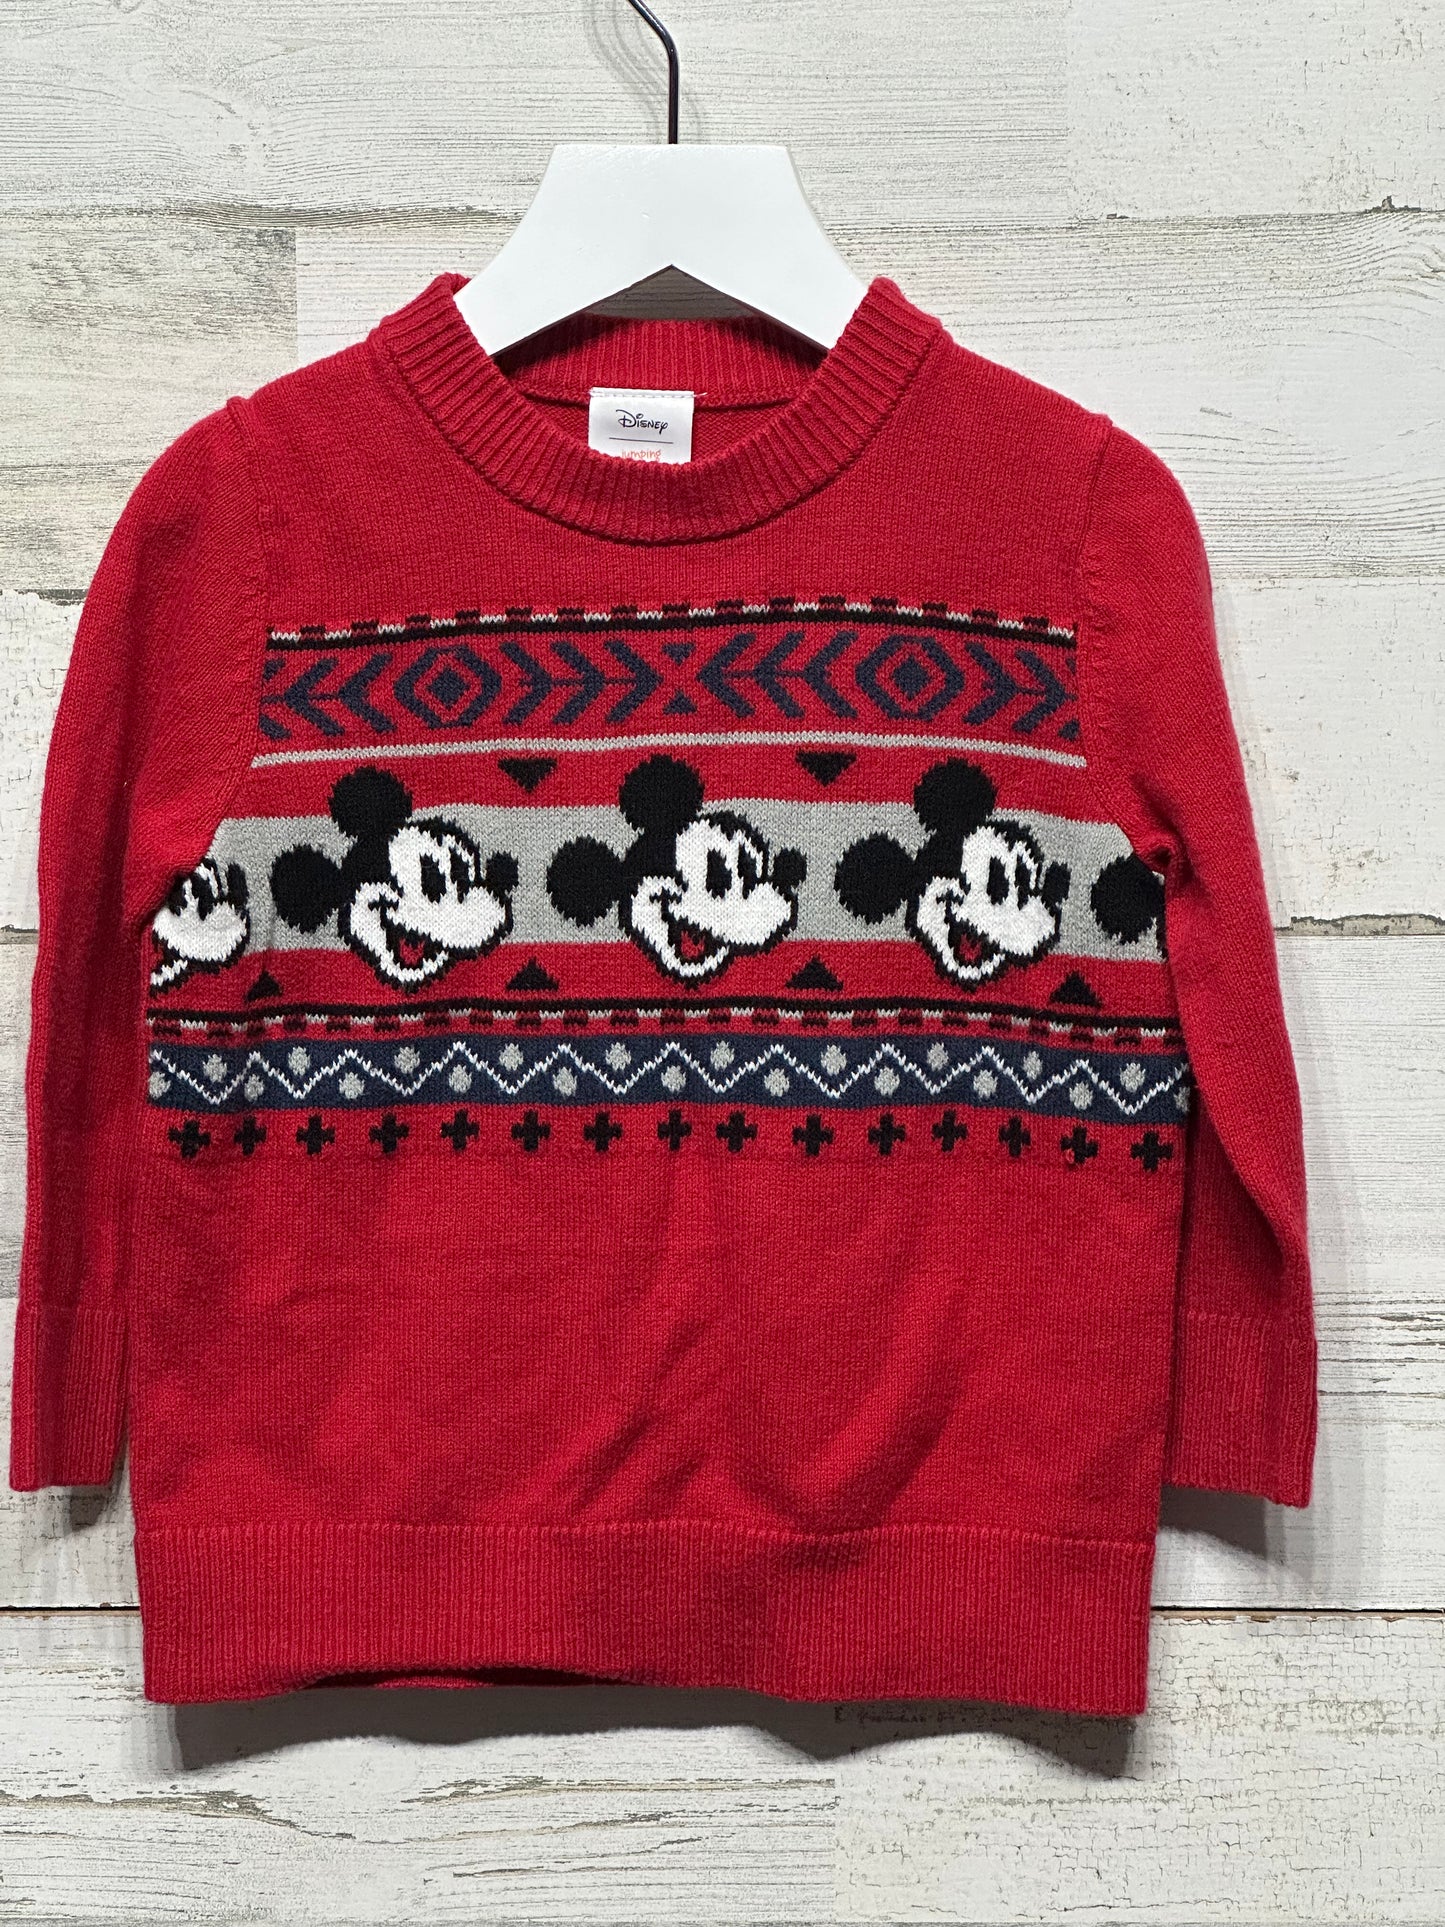 Boys Size 2t Disney / Jumping Beans Mickey Sweater - Good Used Condition